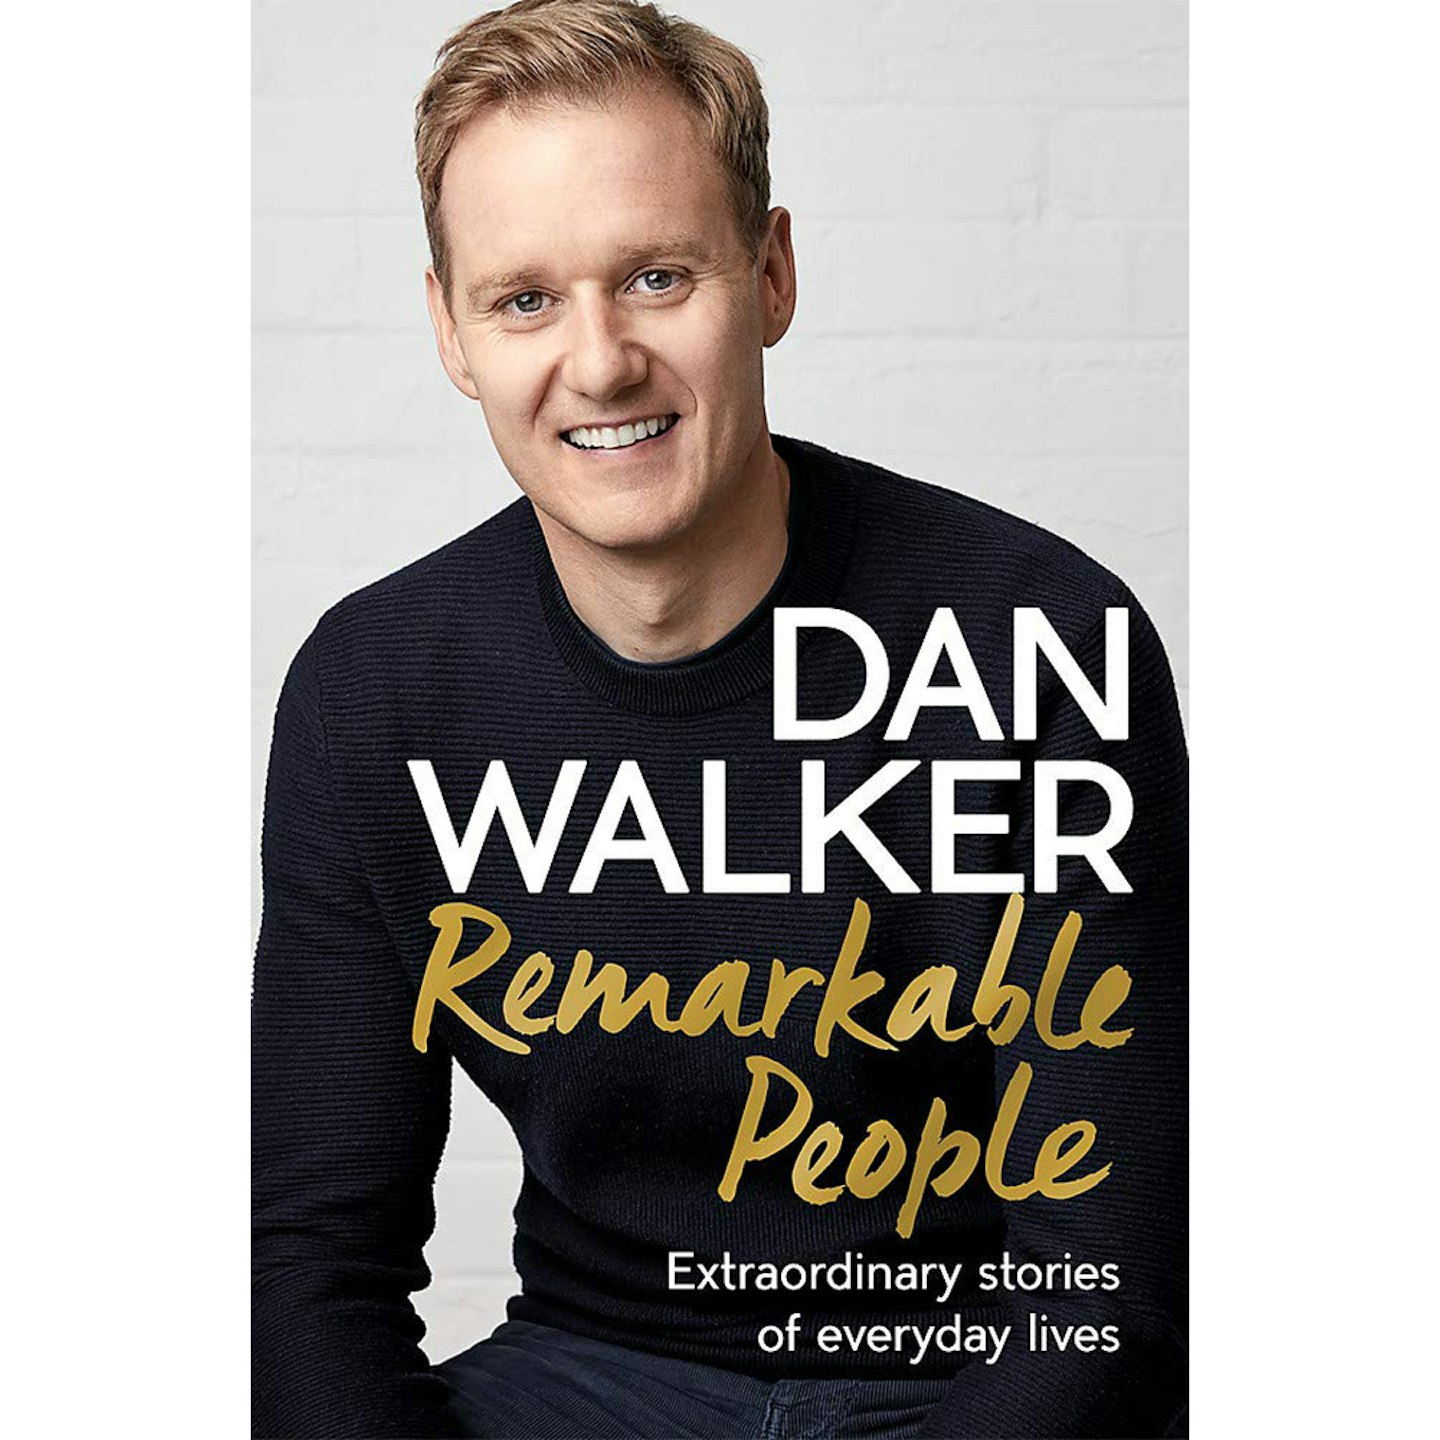 Remarkable People: Extraordinary Stories of Everyday Lives